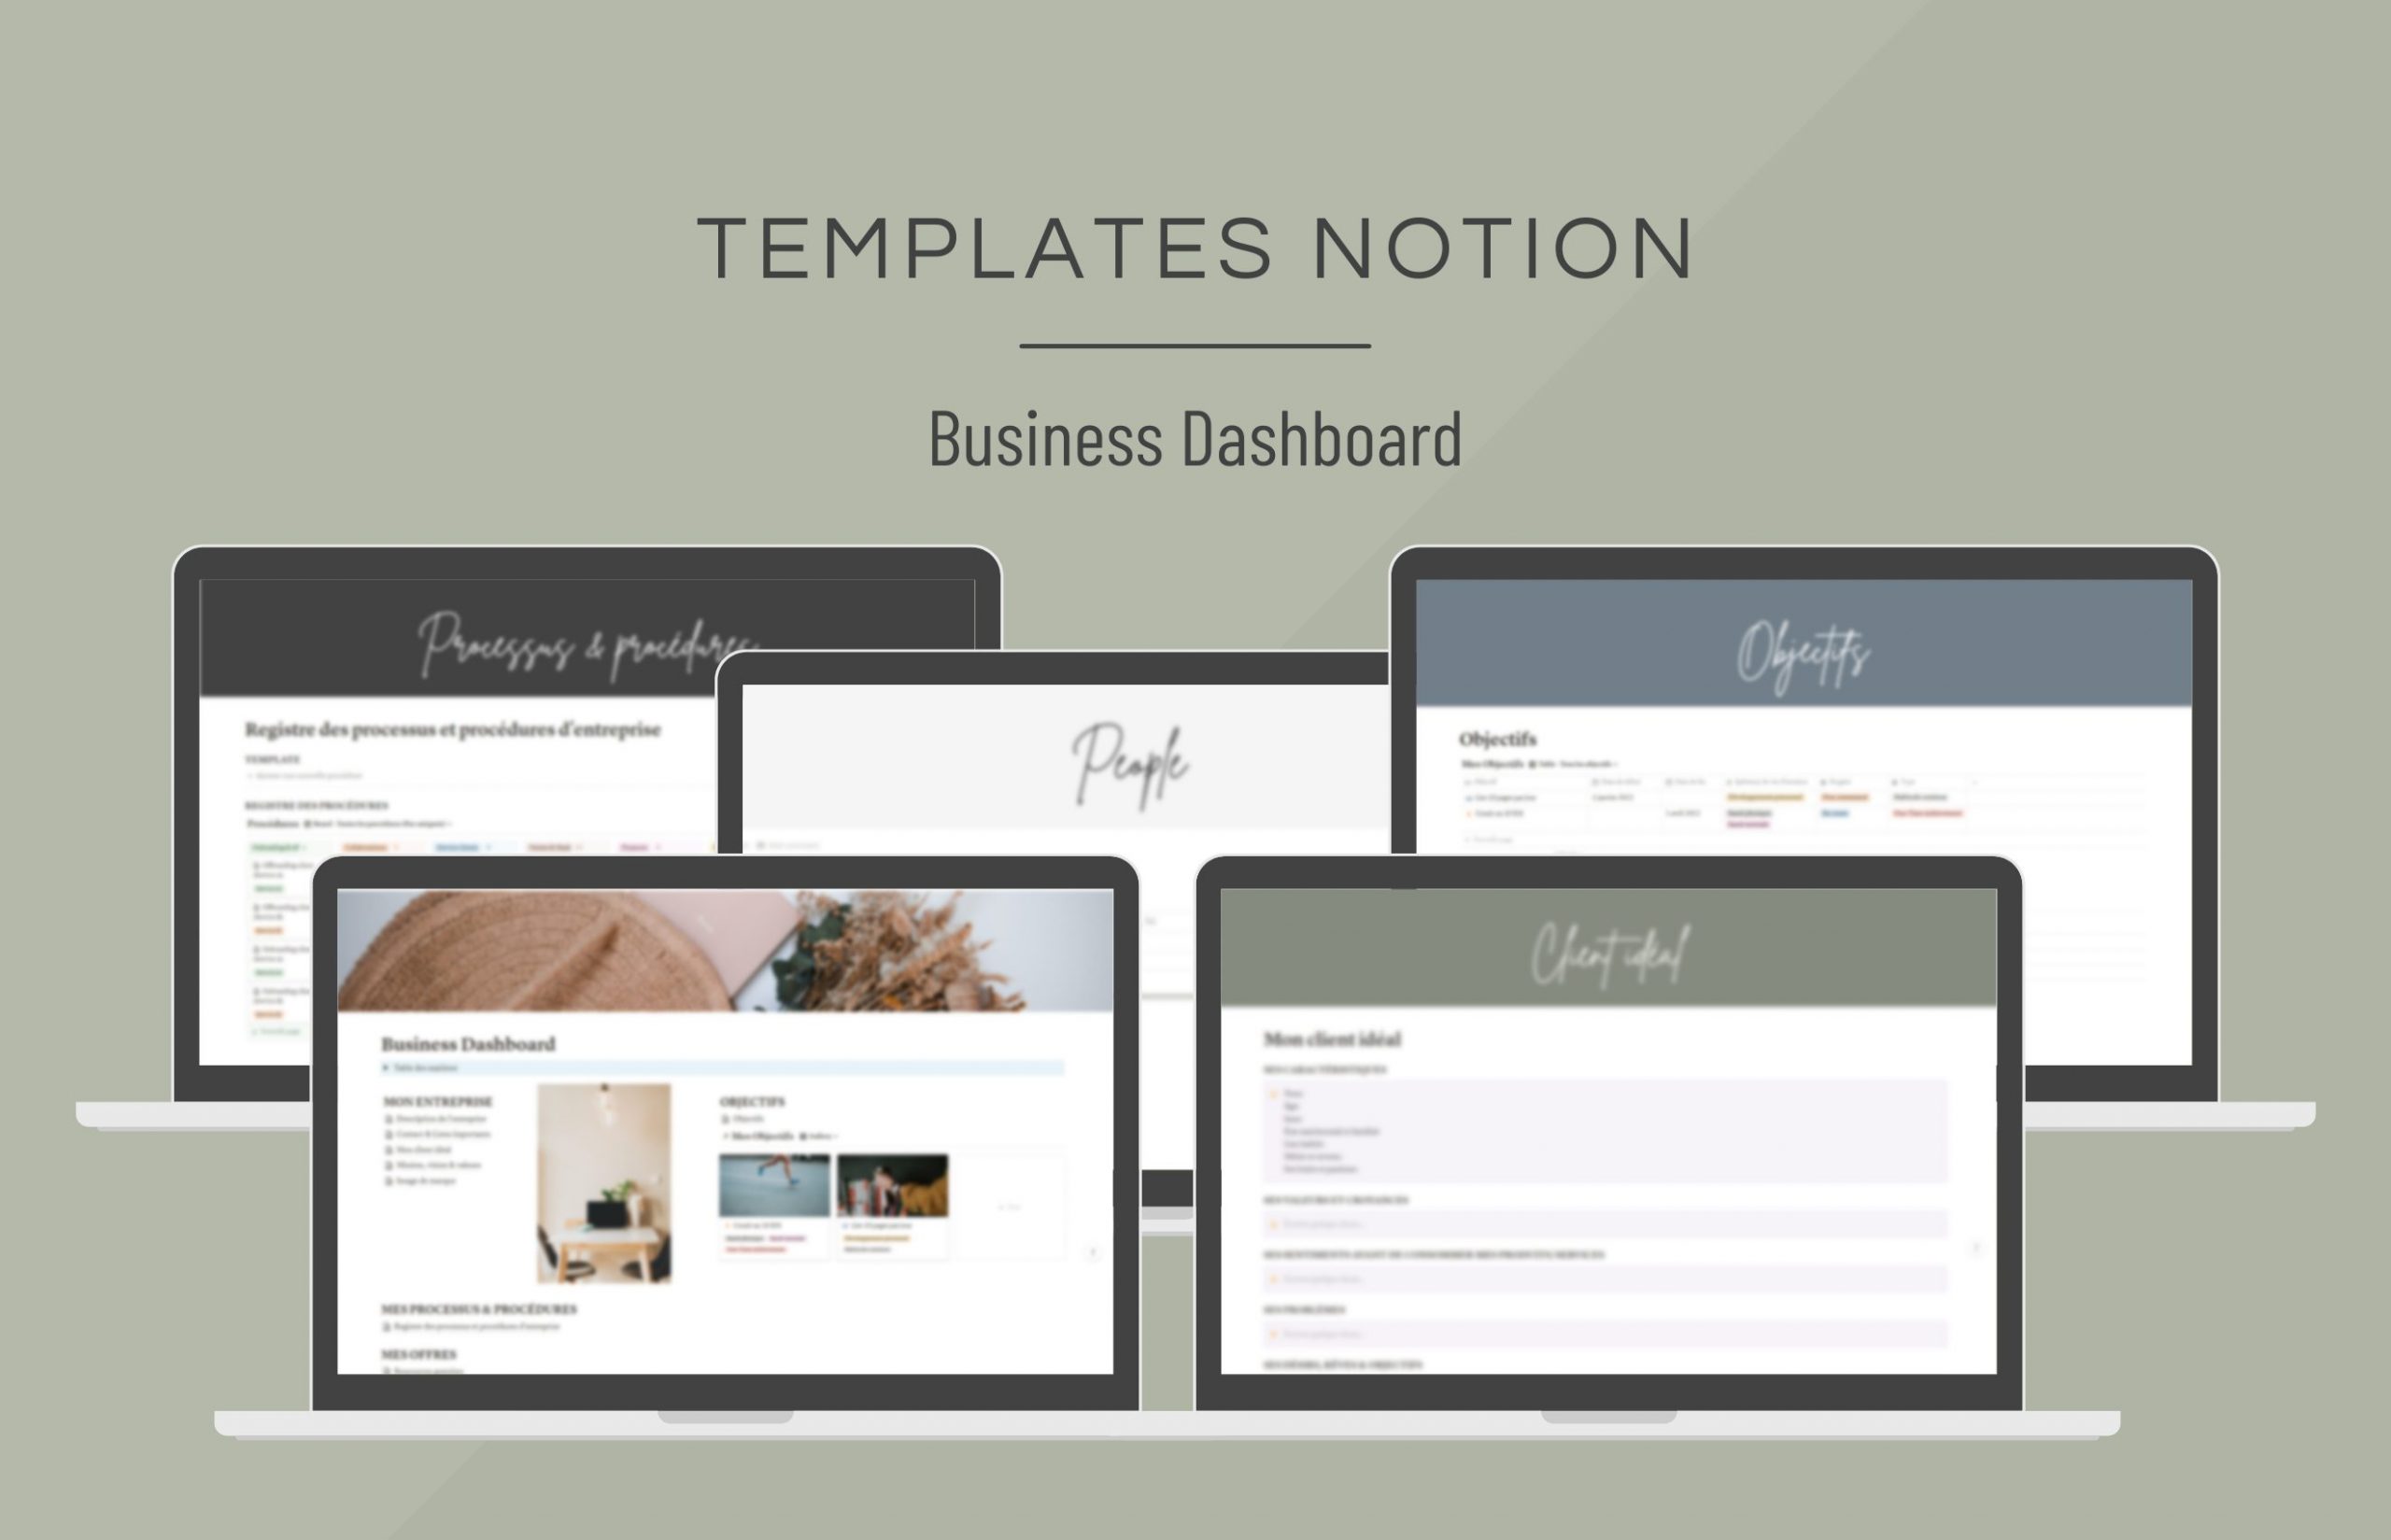 template_notion_bundle_business_dashboard